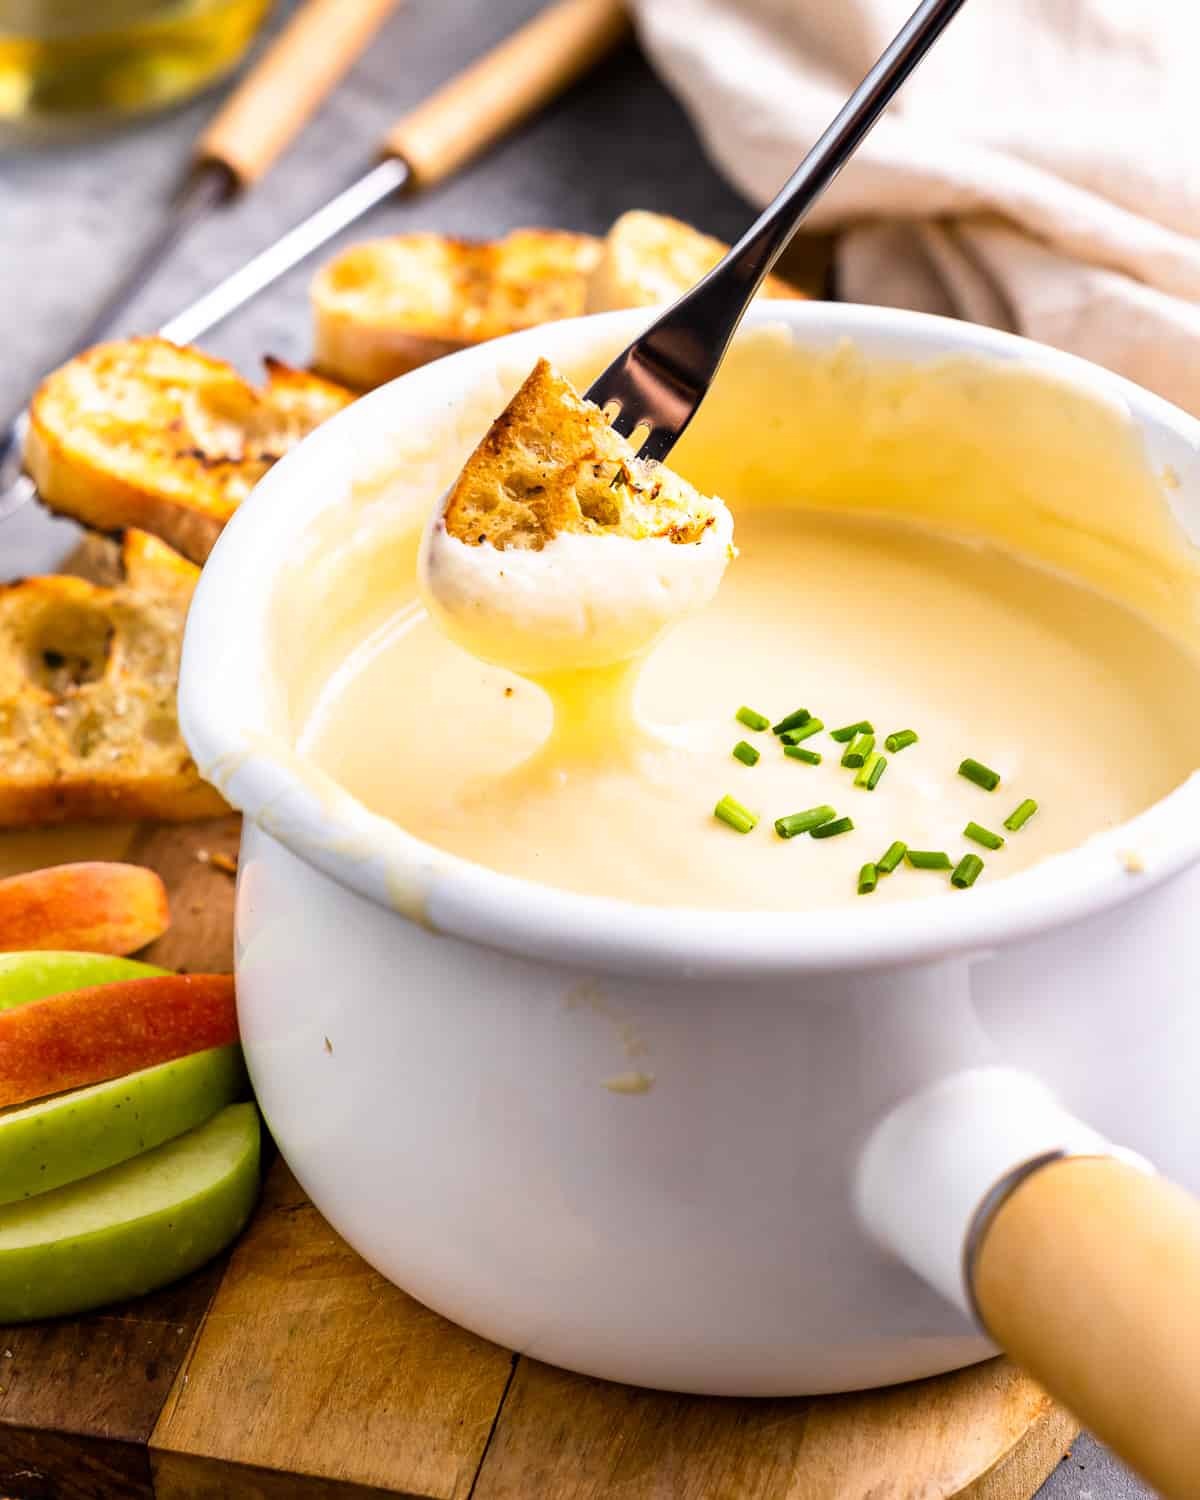 three-quarters view of a piece of grilled bread being dipped into a pot of fondue with a long fork.